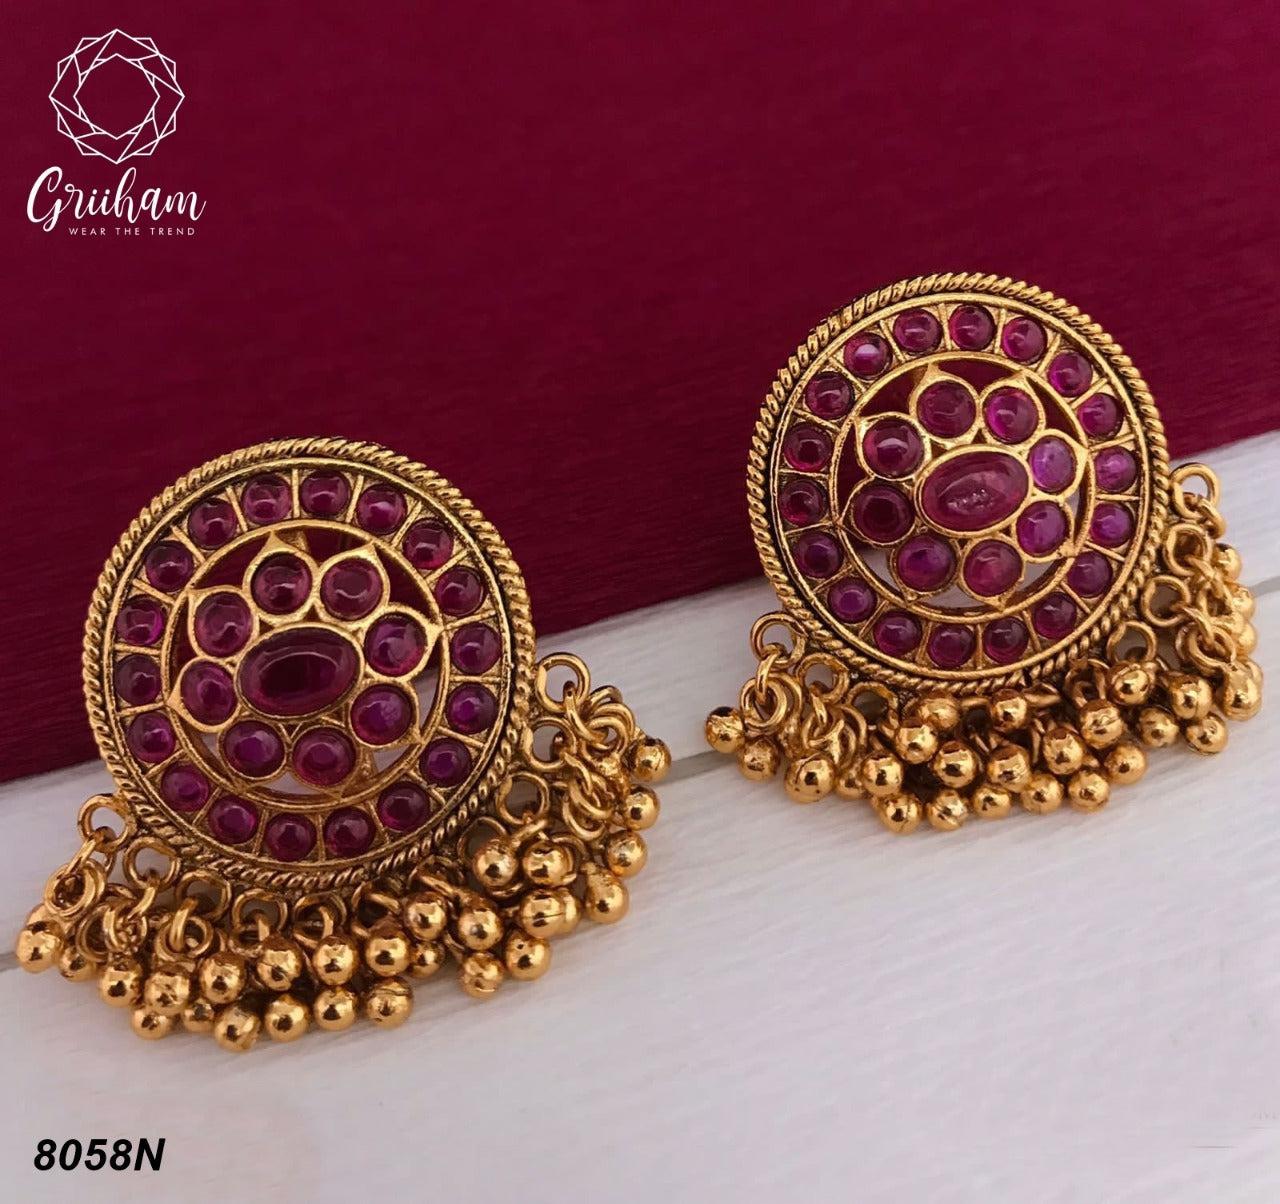 Micro Gold Finish Party Wear Earring / Jhumkas with AD stones 8058N-Jhumkas & Earrings-Griiham-Griiham